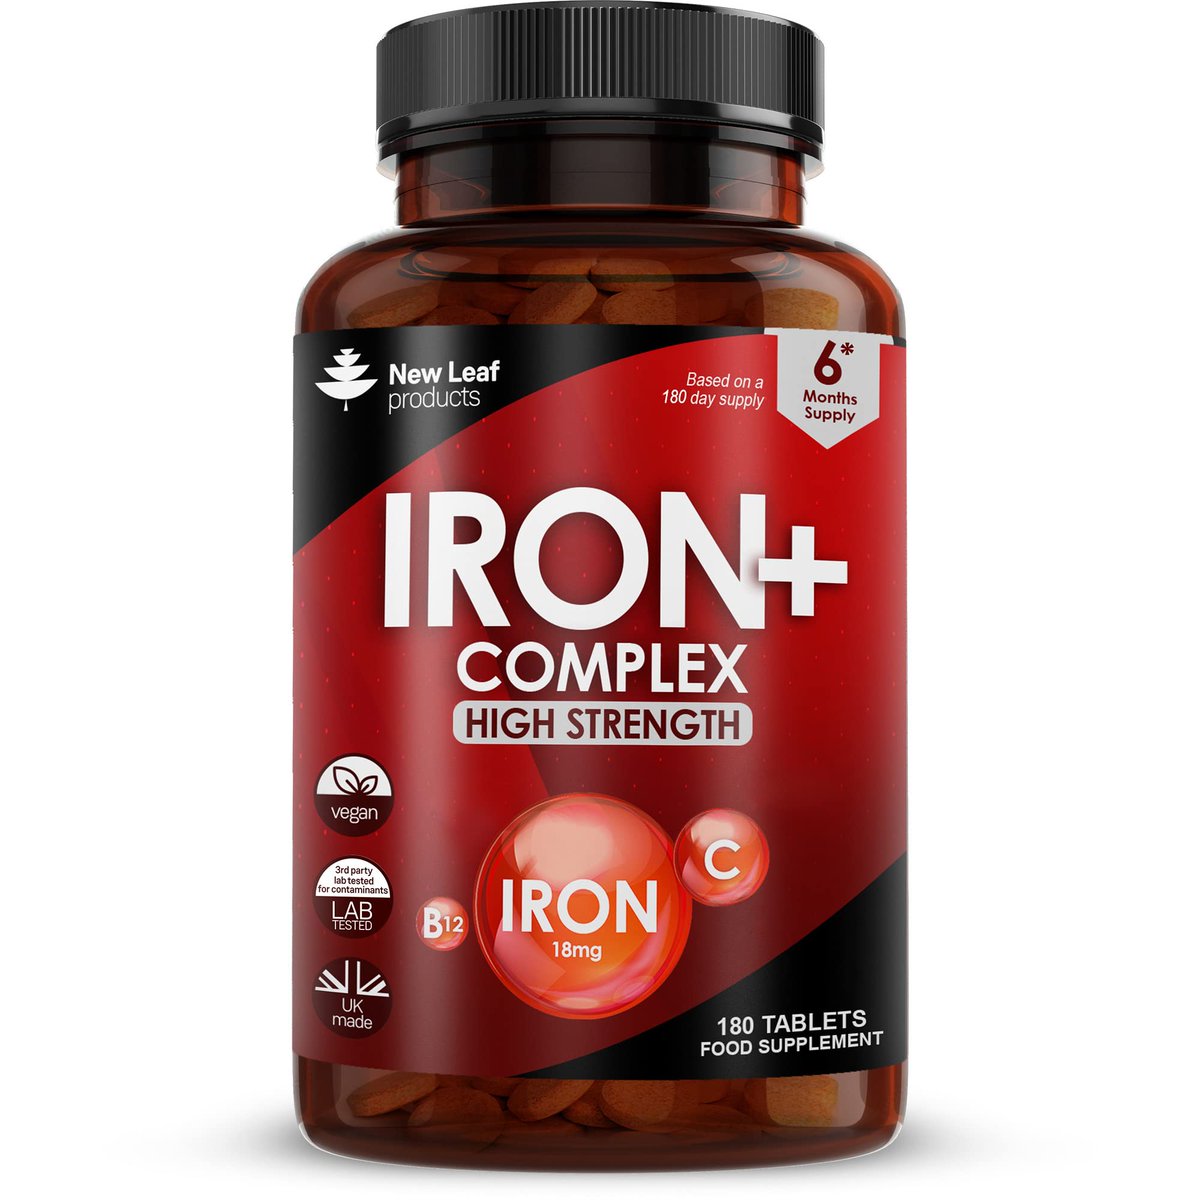 📙𝘾𝙇𝙄𝙉𝙄𝘾𝘼𝙇 𝙌𝙐𝙄𝙕:-

📝Absorption of Iron Supplements can be facilitated by Coadministrating:-

A) Antacids 
B) Phosphates
C) Ascorbic acid
D) Tetracyclines

#medx
#medEd
@fxgodzeuss